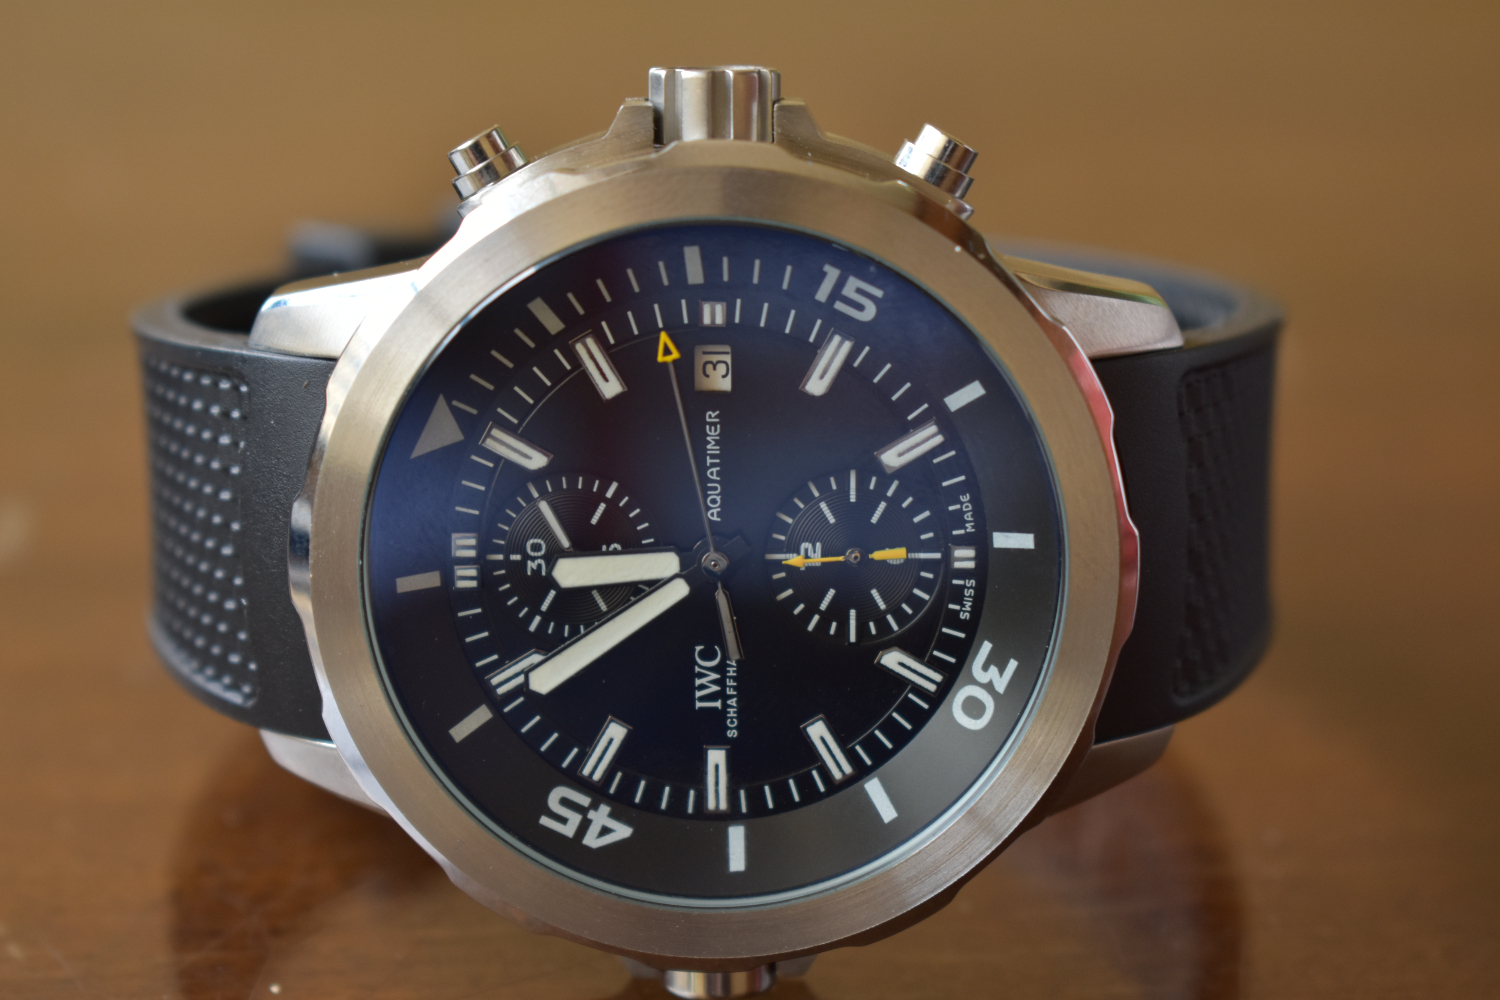 I W C AQUA TIMER EDITION EXPEDITION JACQUES-YVES COUSTEAU CHRONOGRAPH WATCH FOR SALE IN NAIROBI,KENYA.